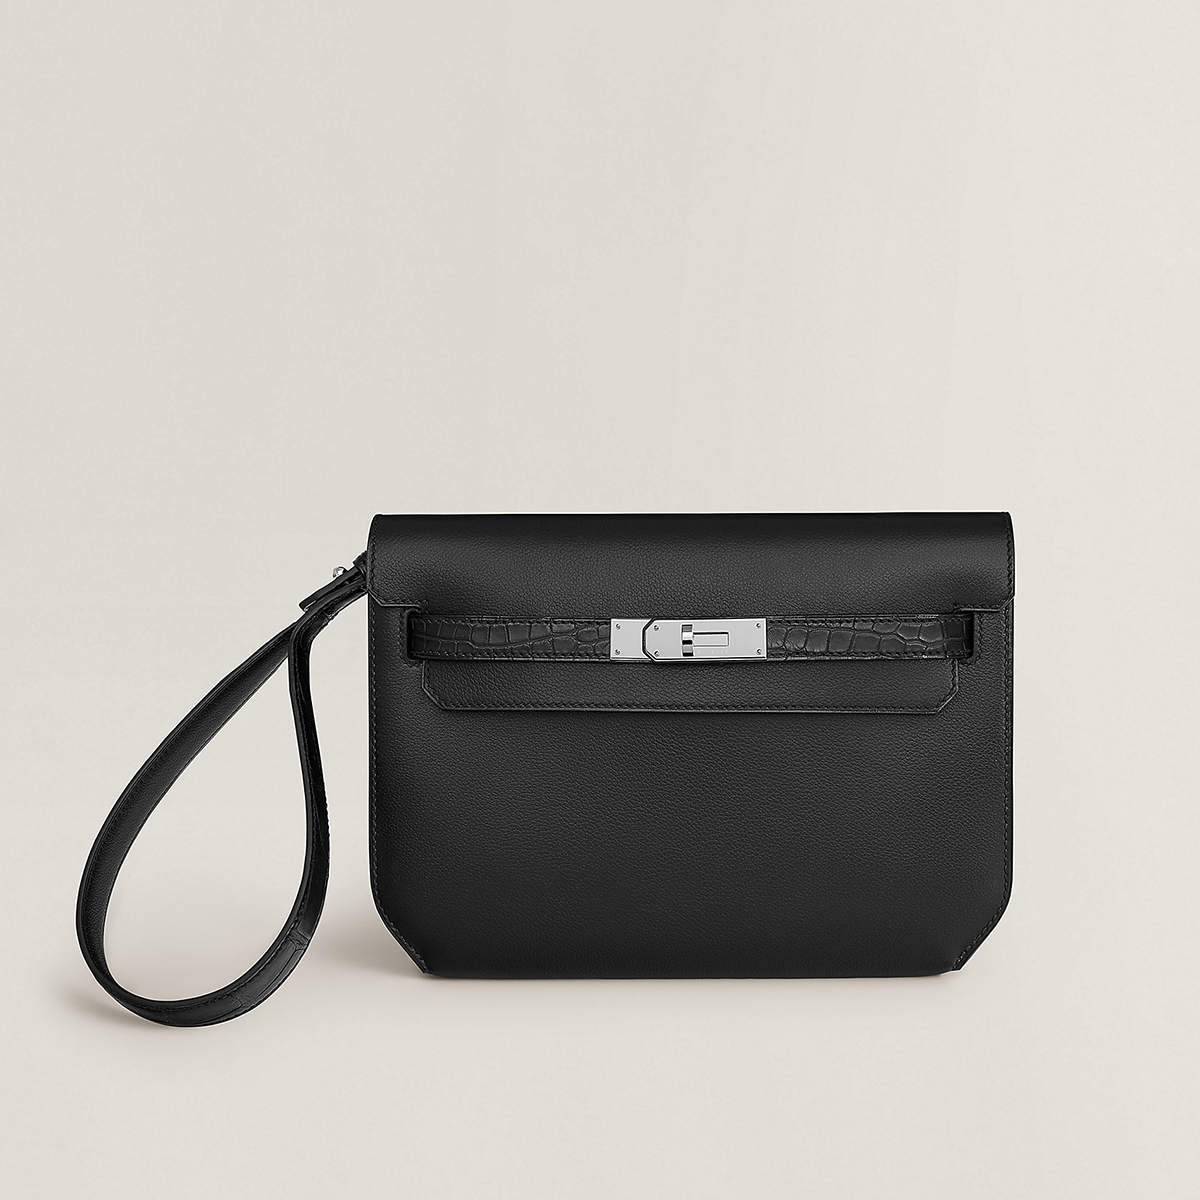 A Kelly Depeches 25 Pouch in Noir Evergrain and Matte Gator from October 2021. Photo via Hermes.com.